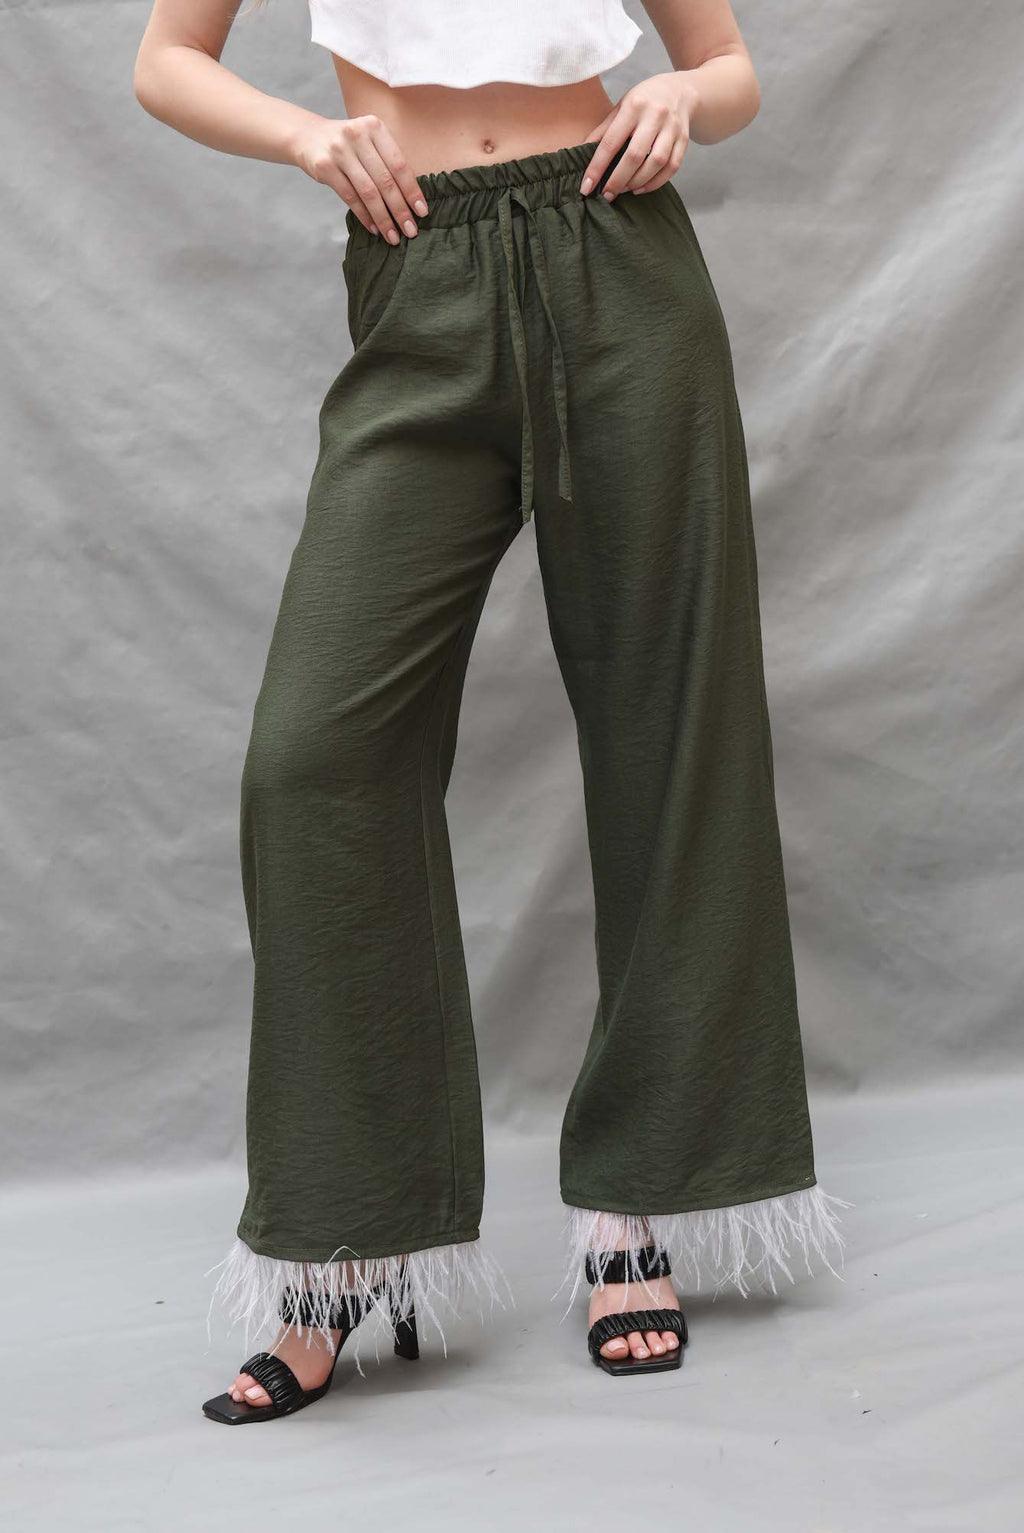 Plume pants in olive